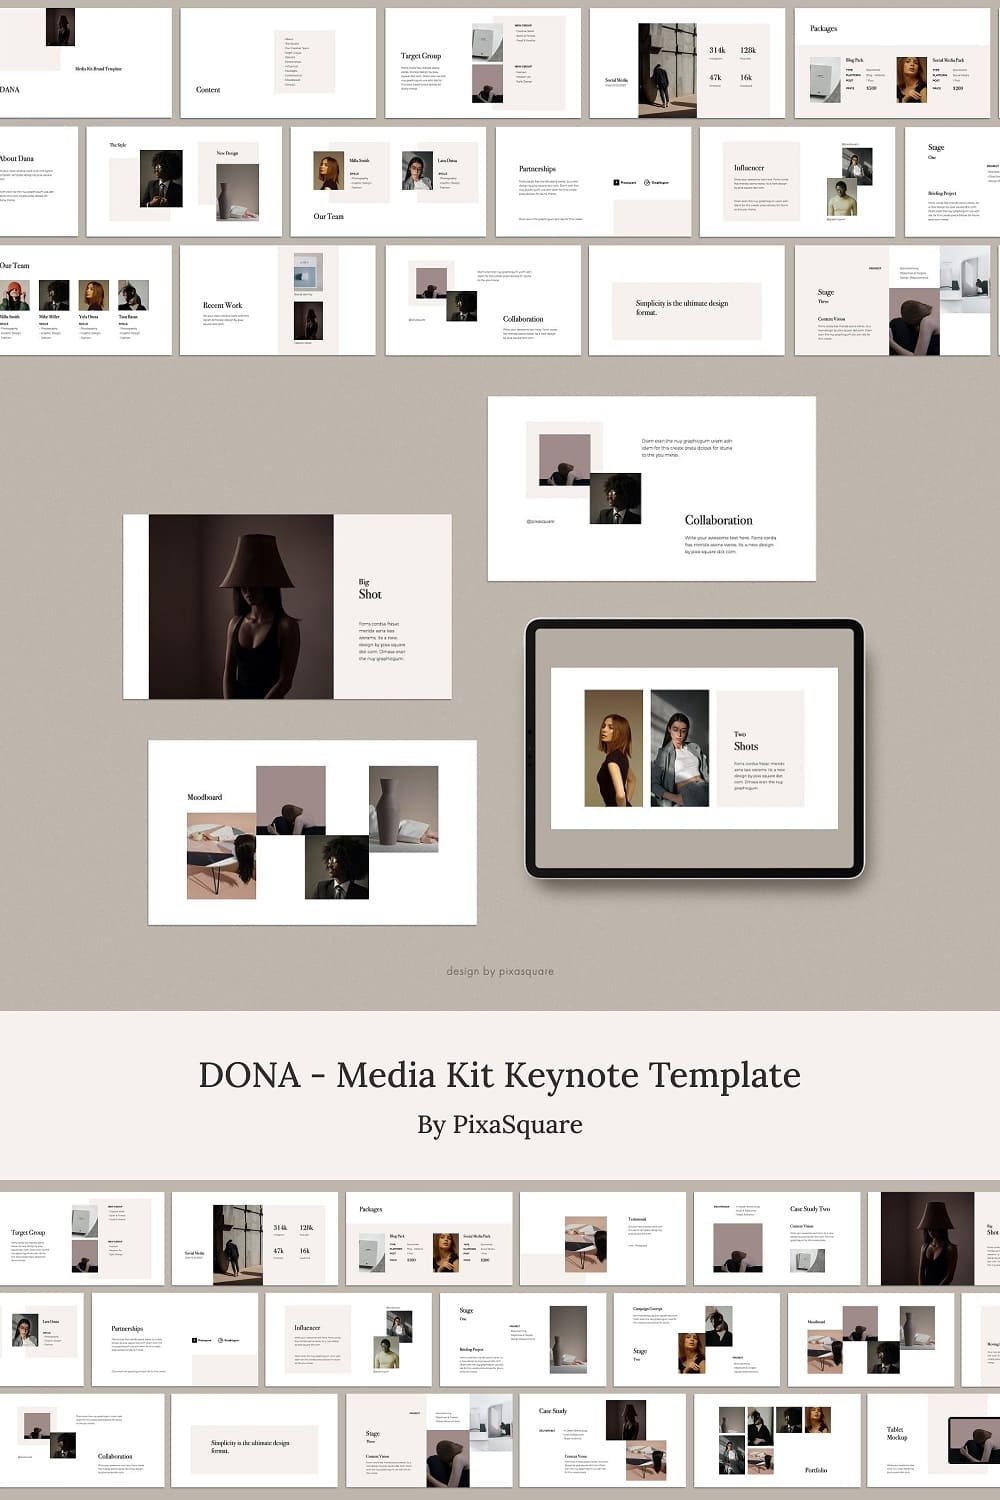 Four examples of Dona's presentation content.